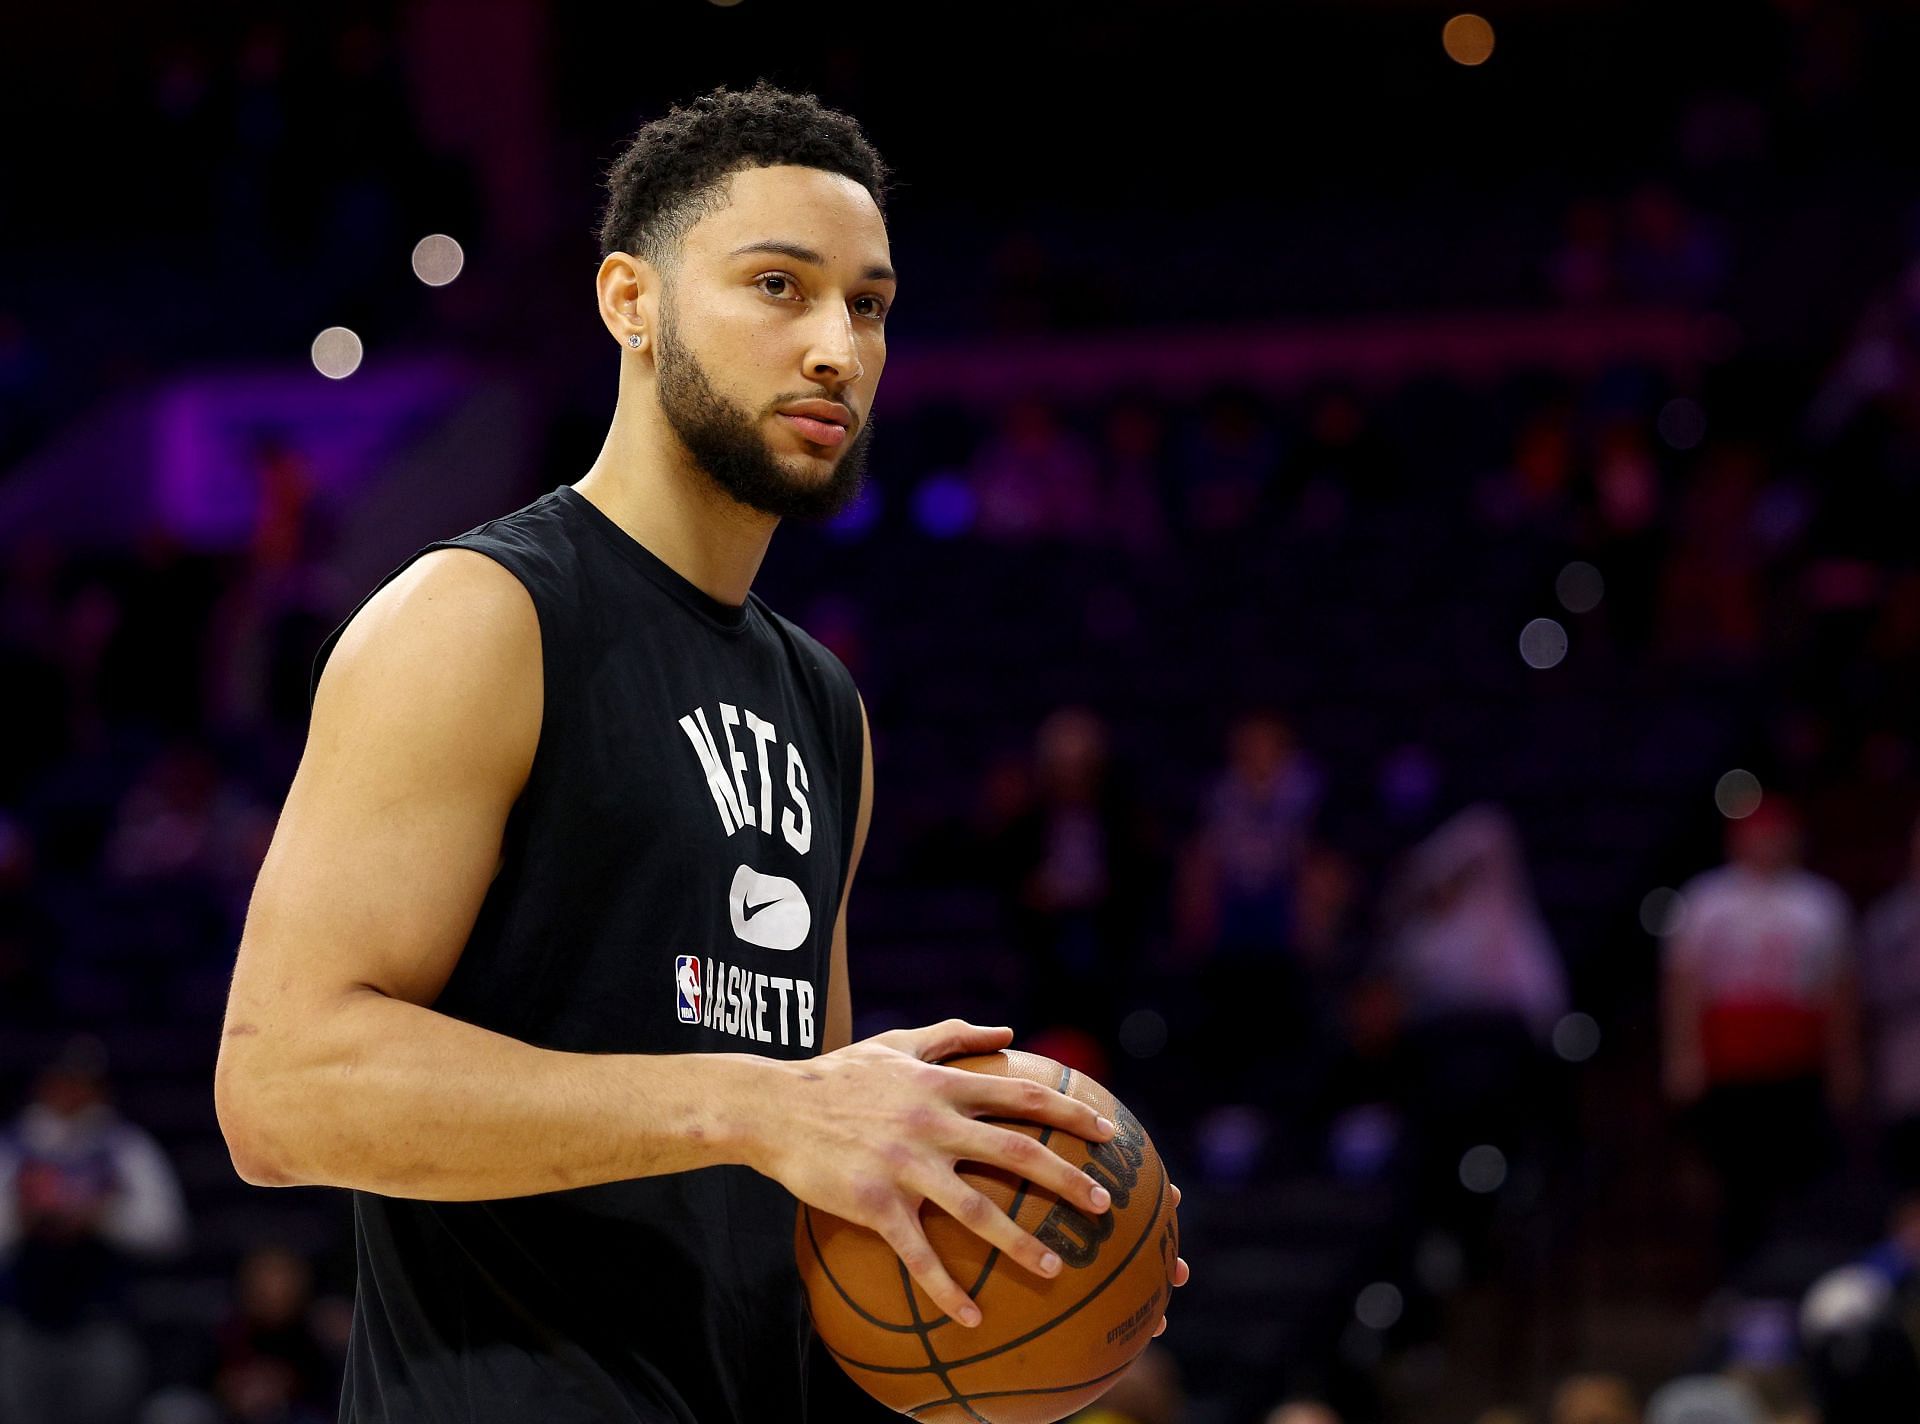 Ben Simmons No.10 of the Brooklyn Nets.